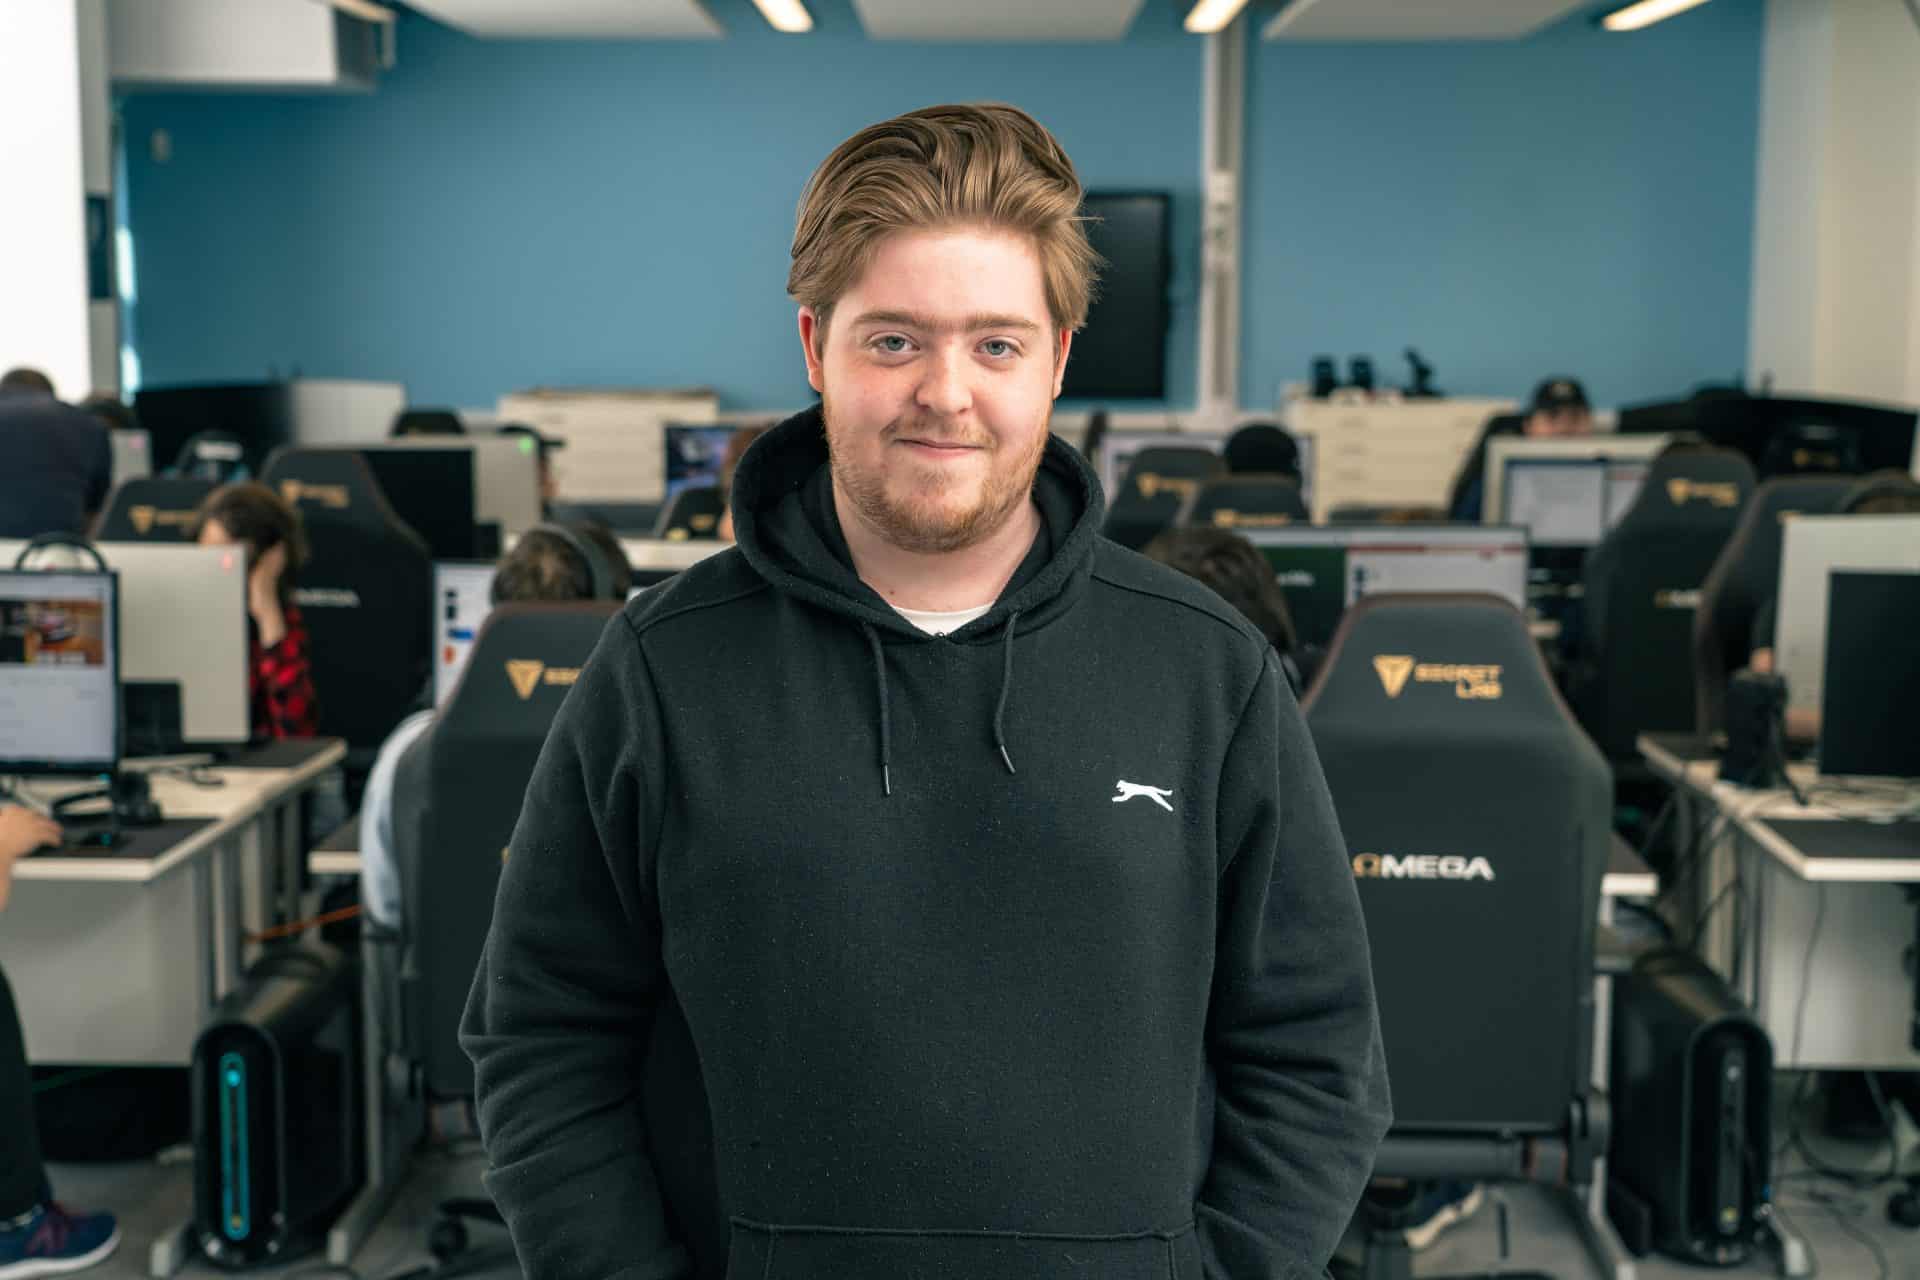 Jordan Silvester who is studying Esports at South Devon College.